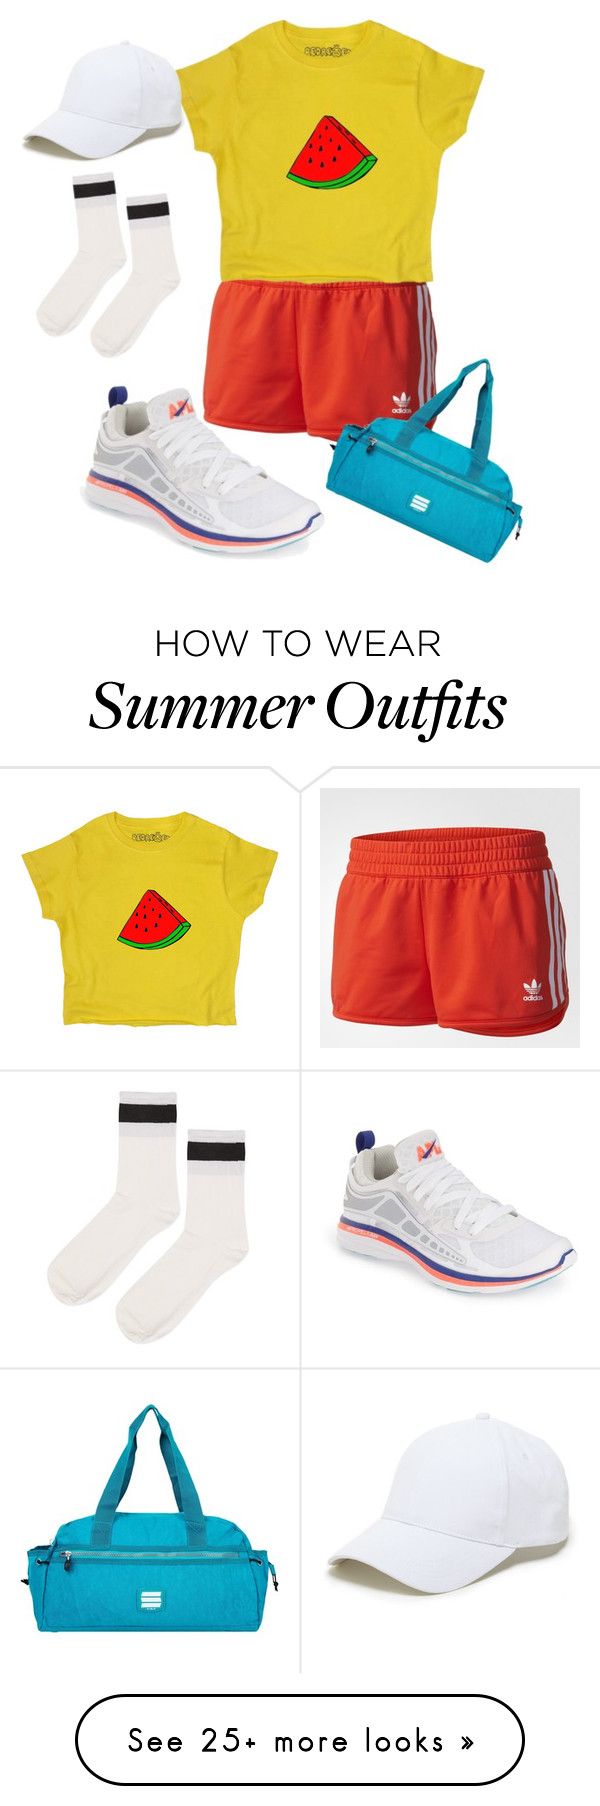 "My First Polyvore Outfit" by roger-chickenstein on Polyvore featuring...